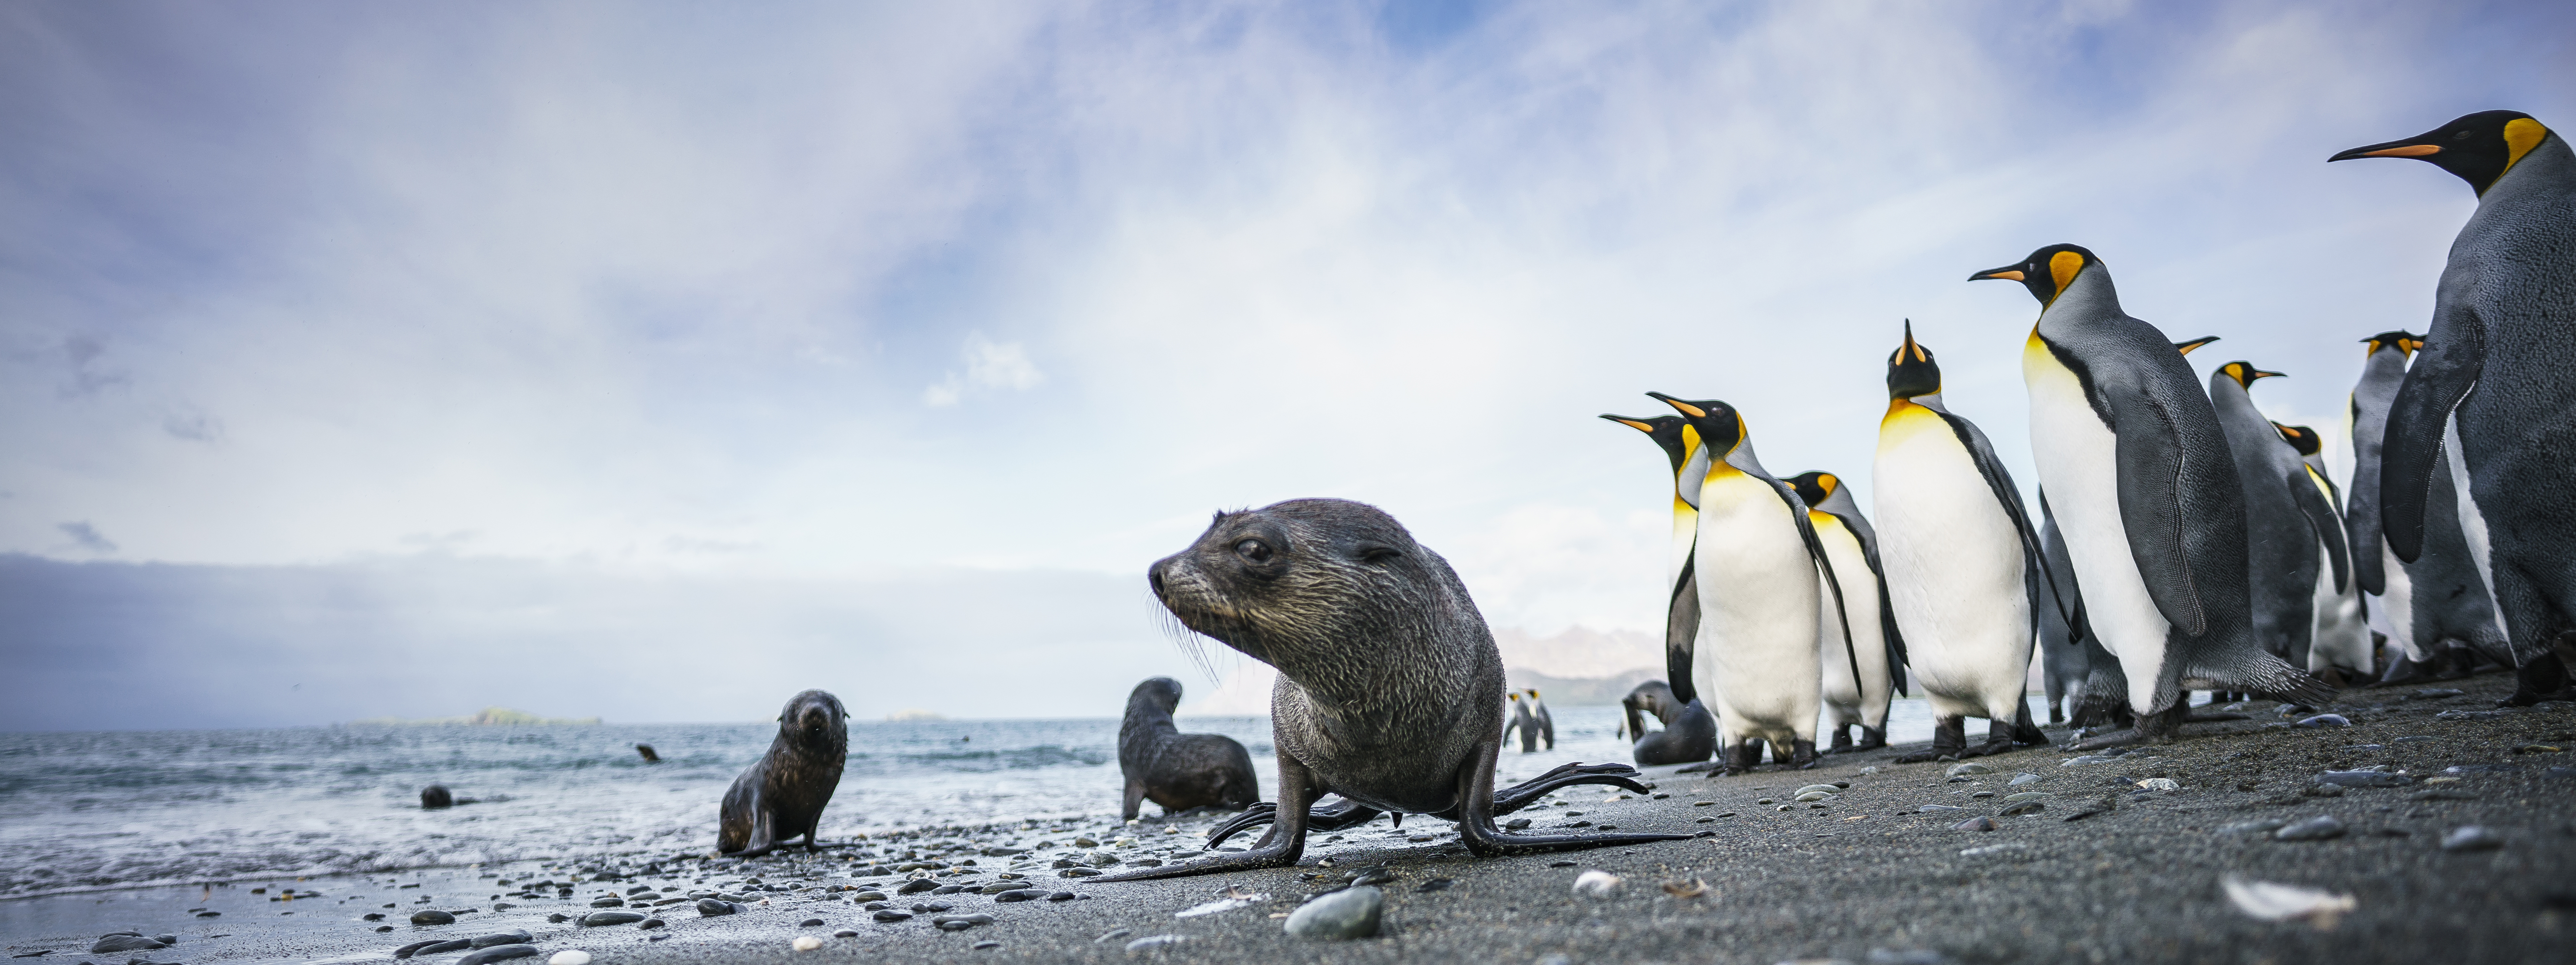 Fur Seals and King Penguins in South Georgia